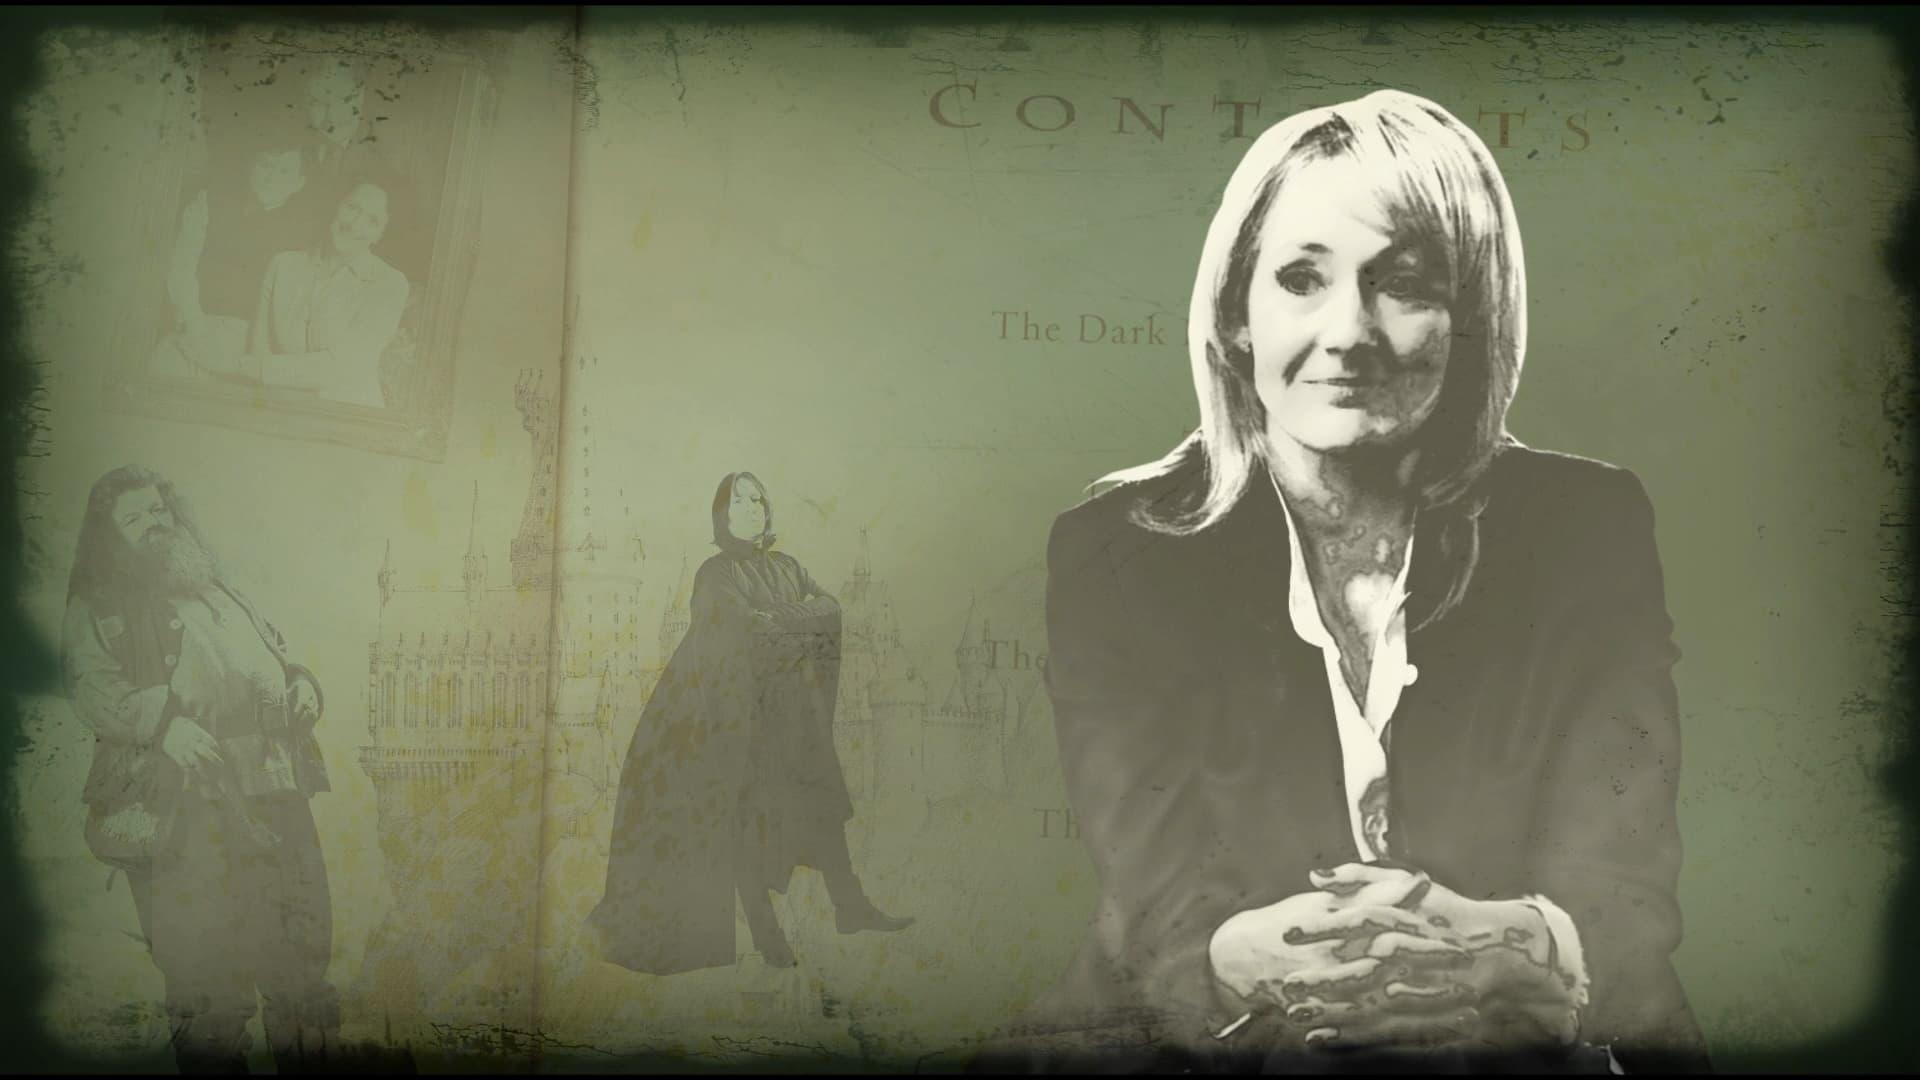 A Conversation with J.K. Rowling and Daniel Radcliffe backdrop